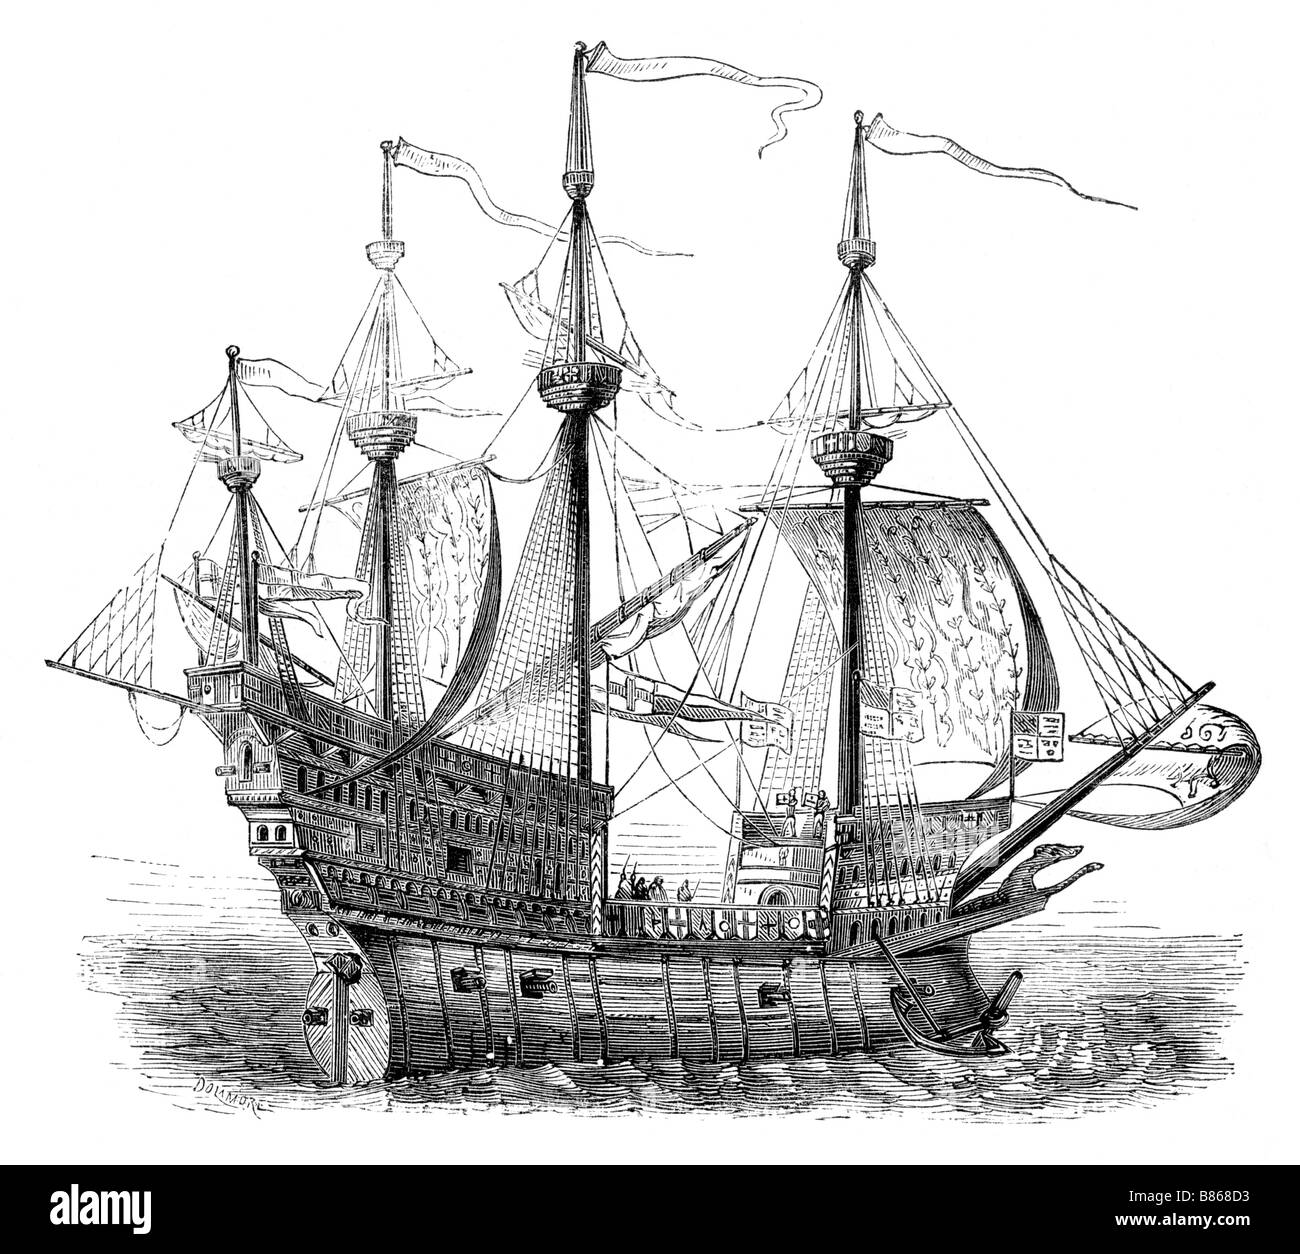 Illustration of a Medieval Galleon at the time of King Henry VIII England Stock Photo